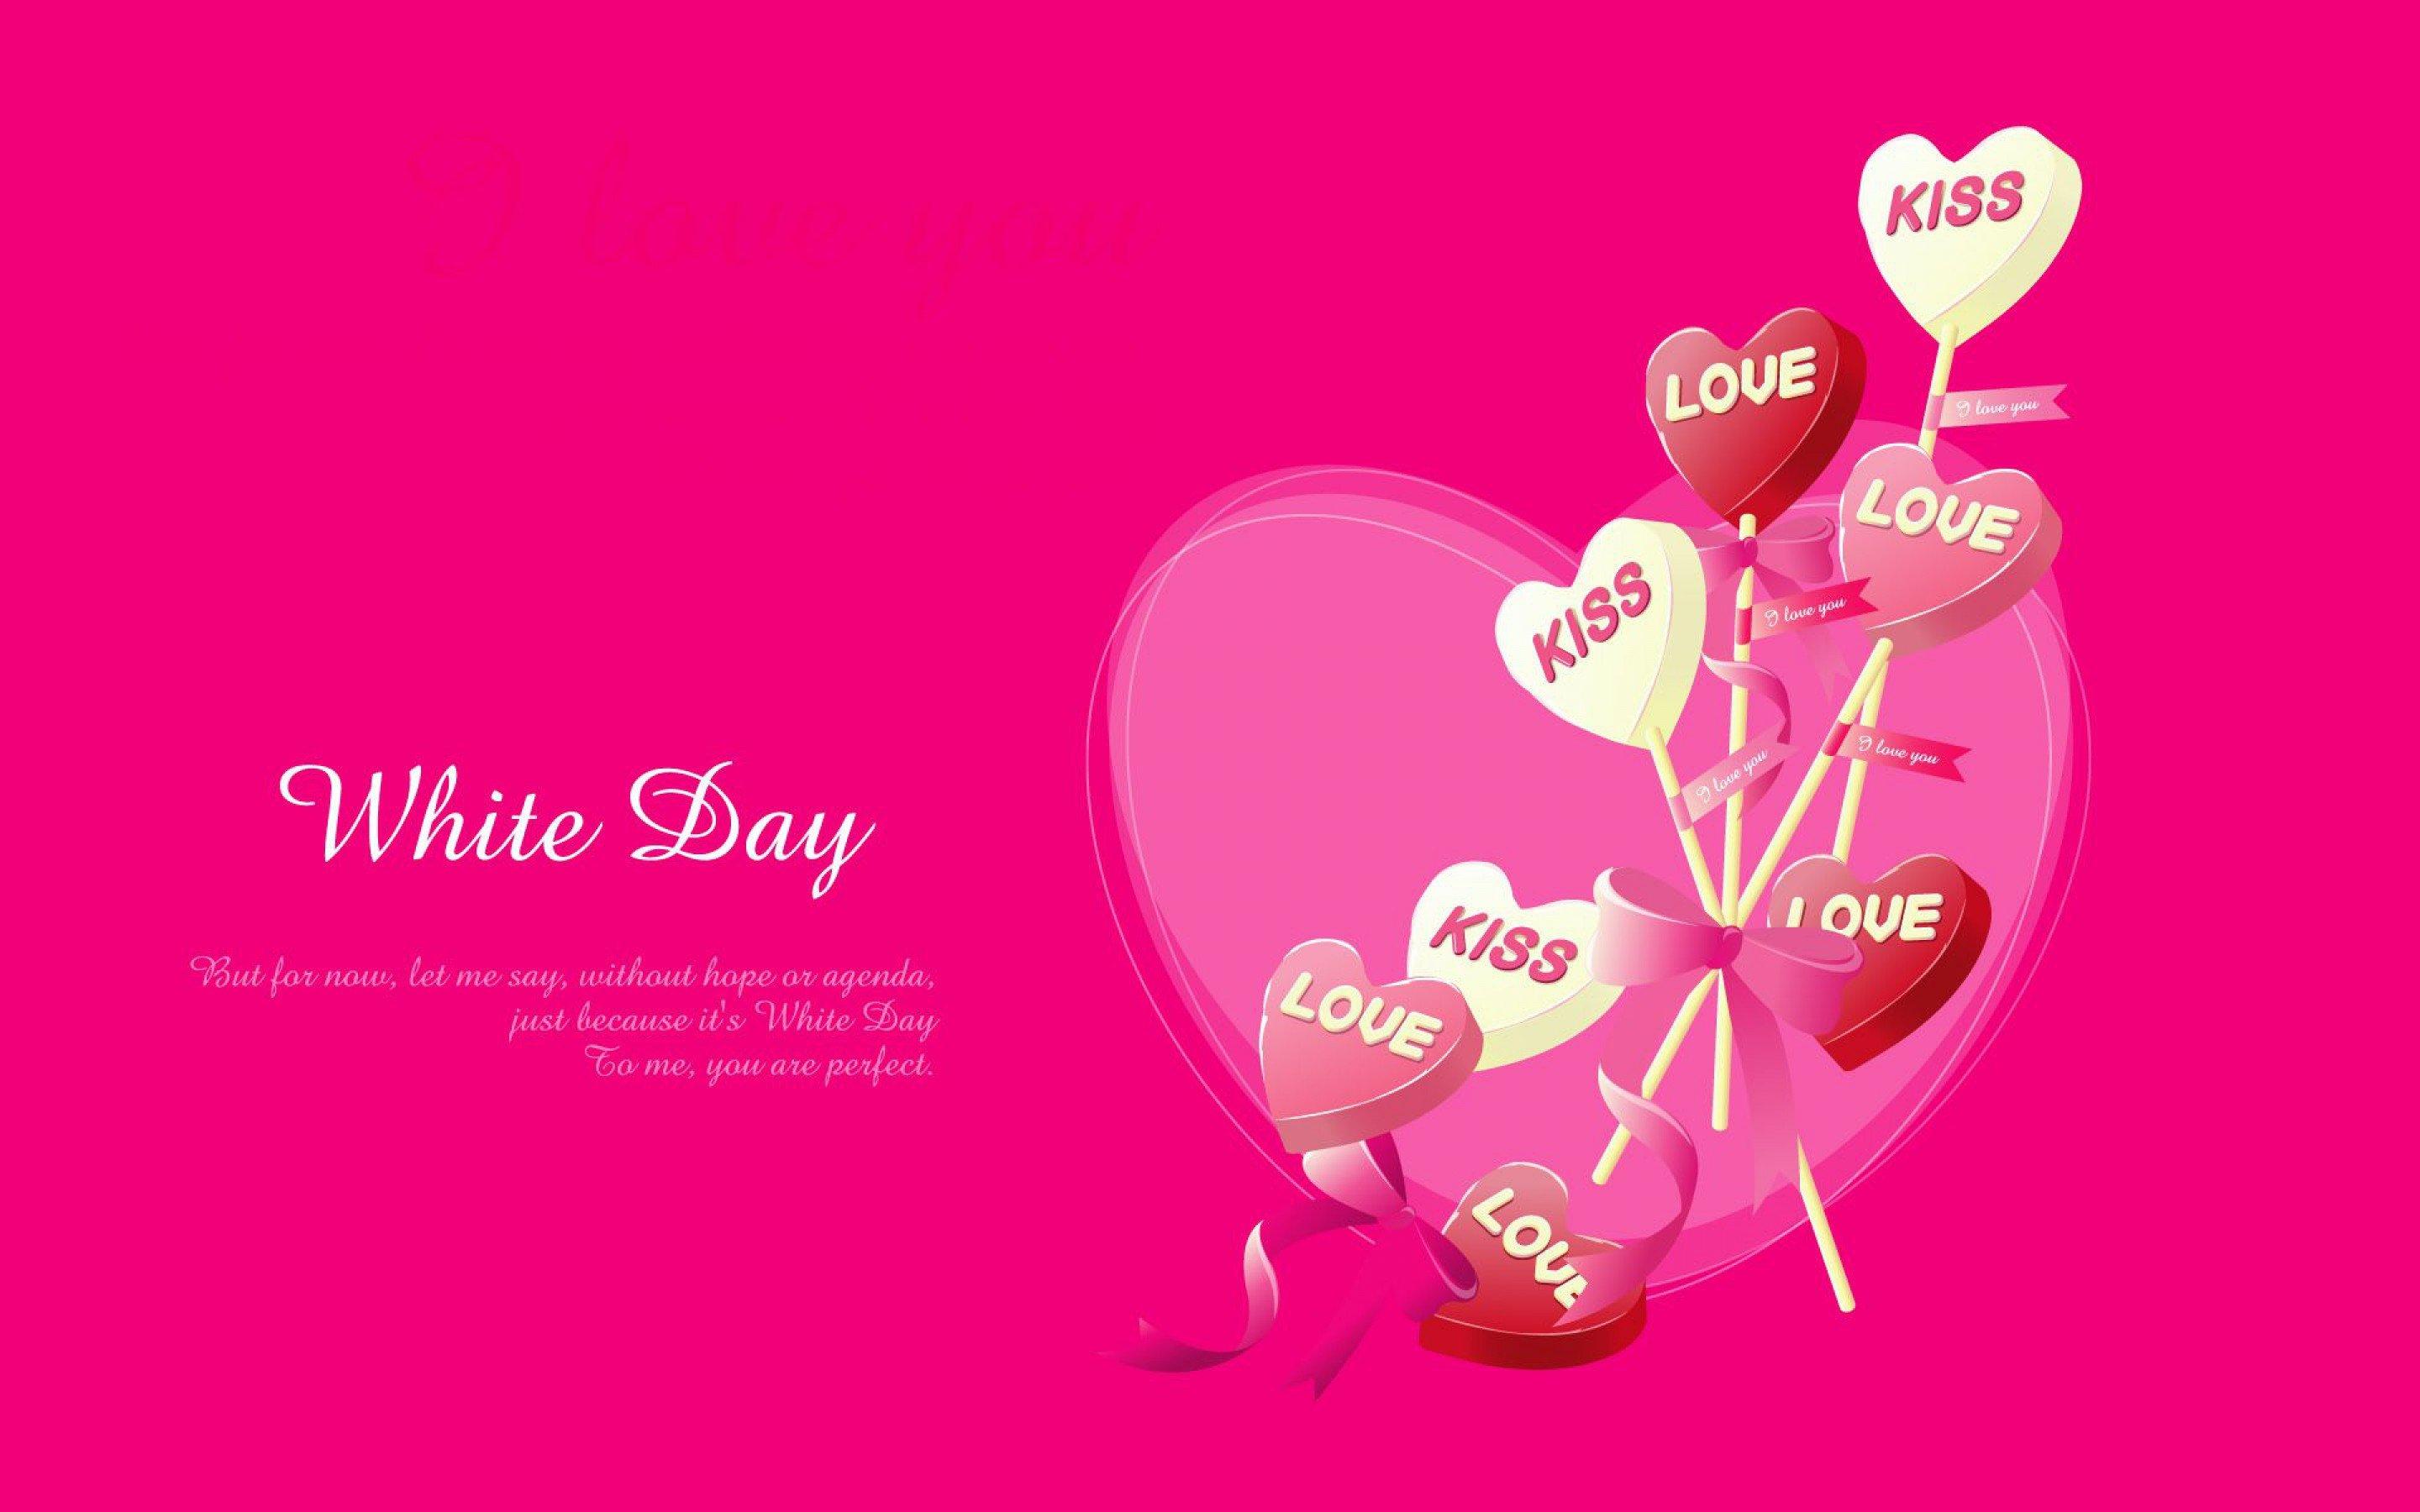 VALENTINES DAY mood love poster wallpaperx1800